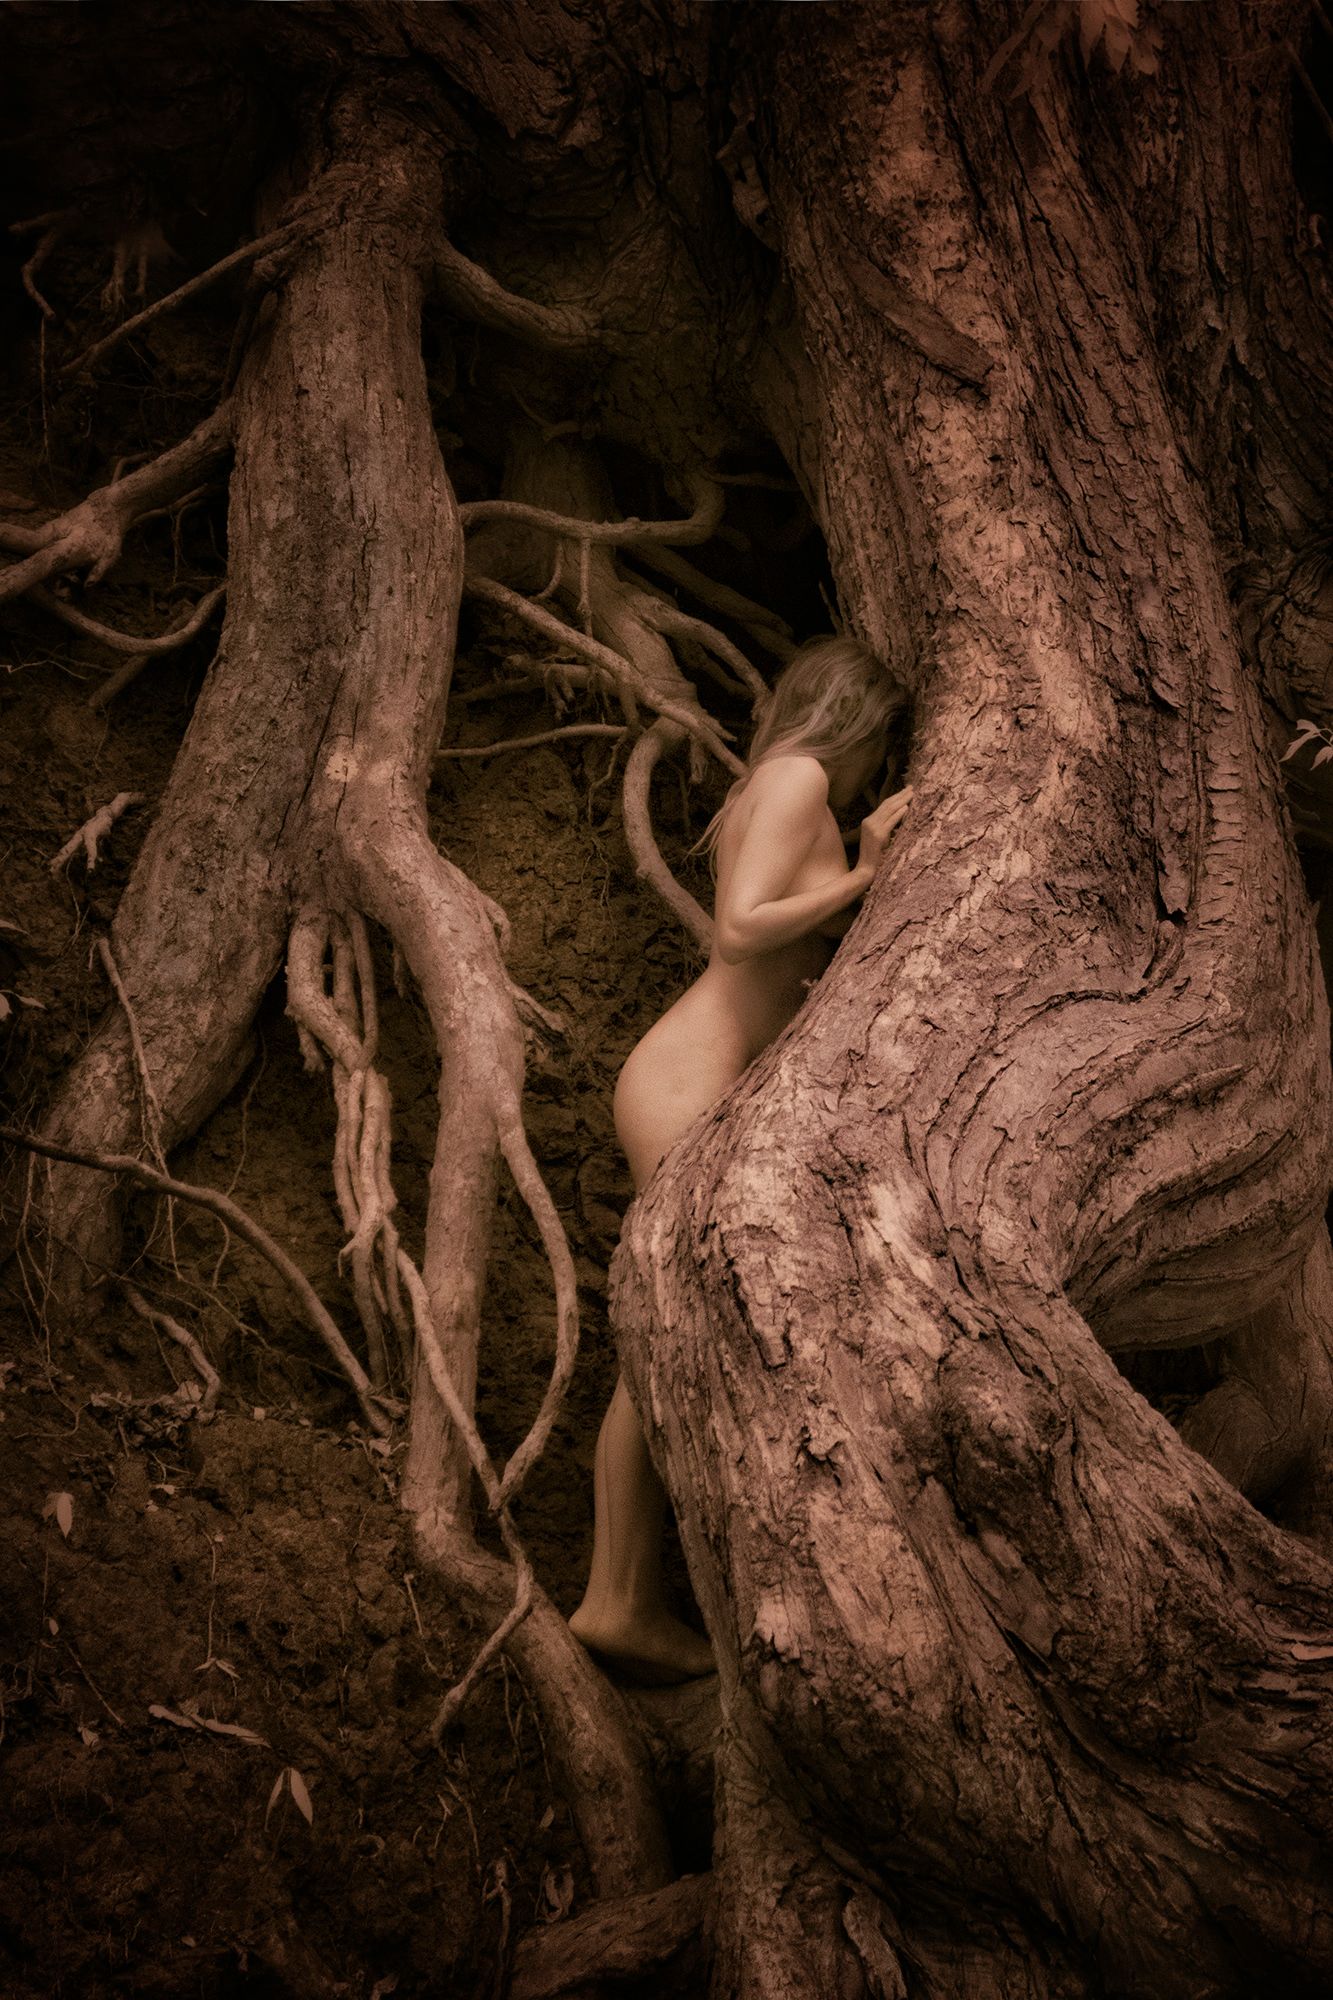 standing nude among the roots